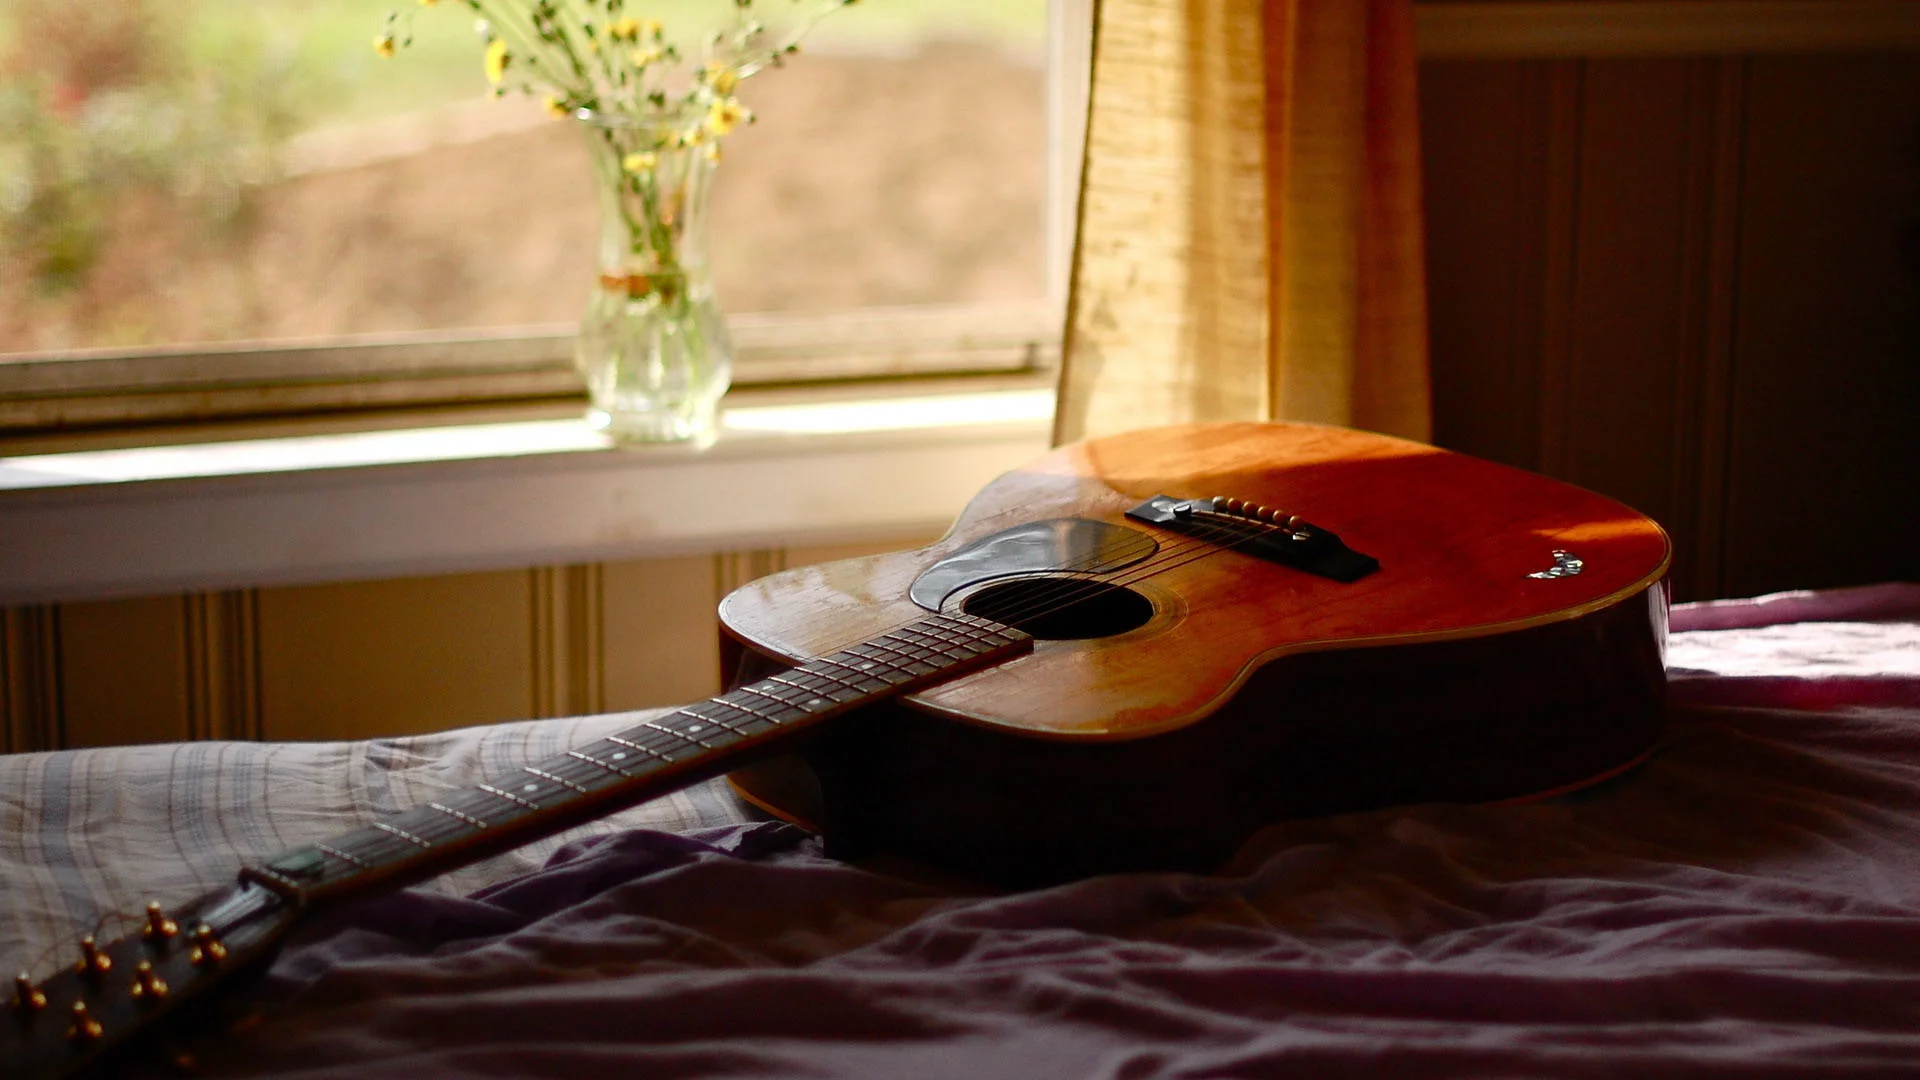 Acoustic guitar wallpaper hd resolution with high definition